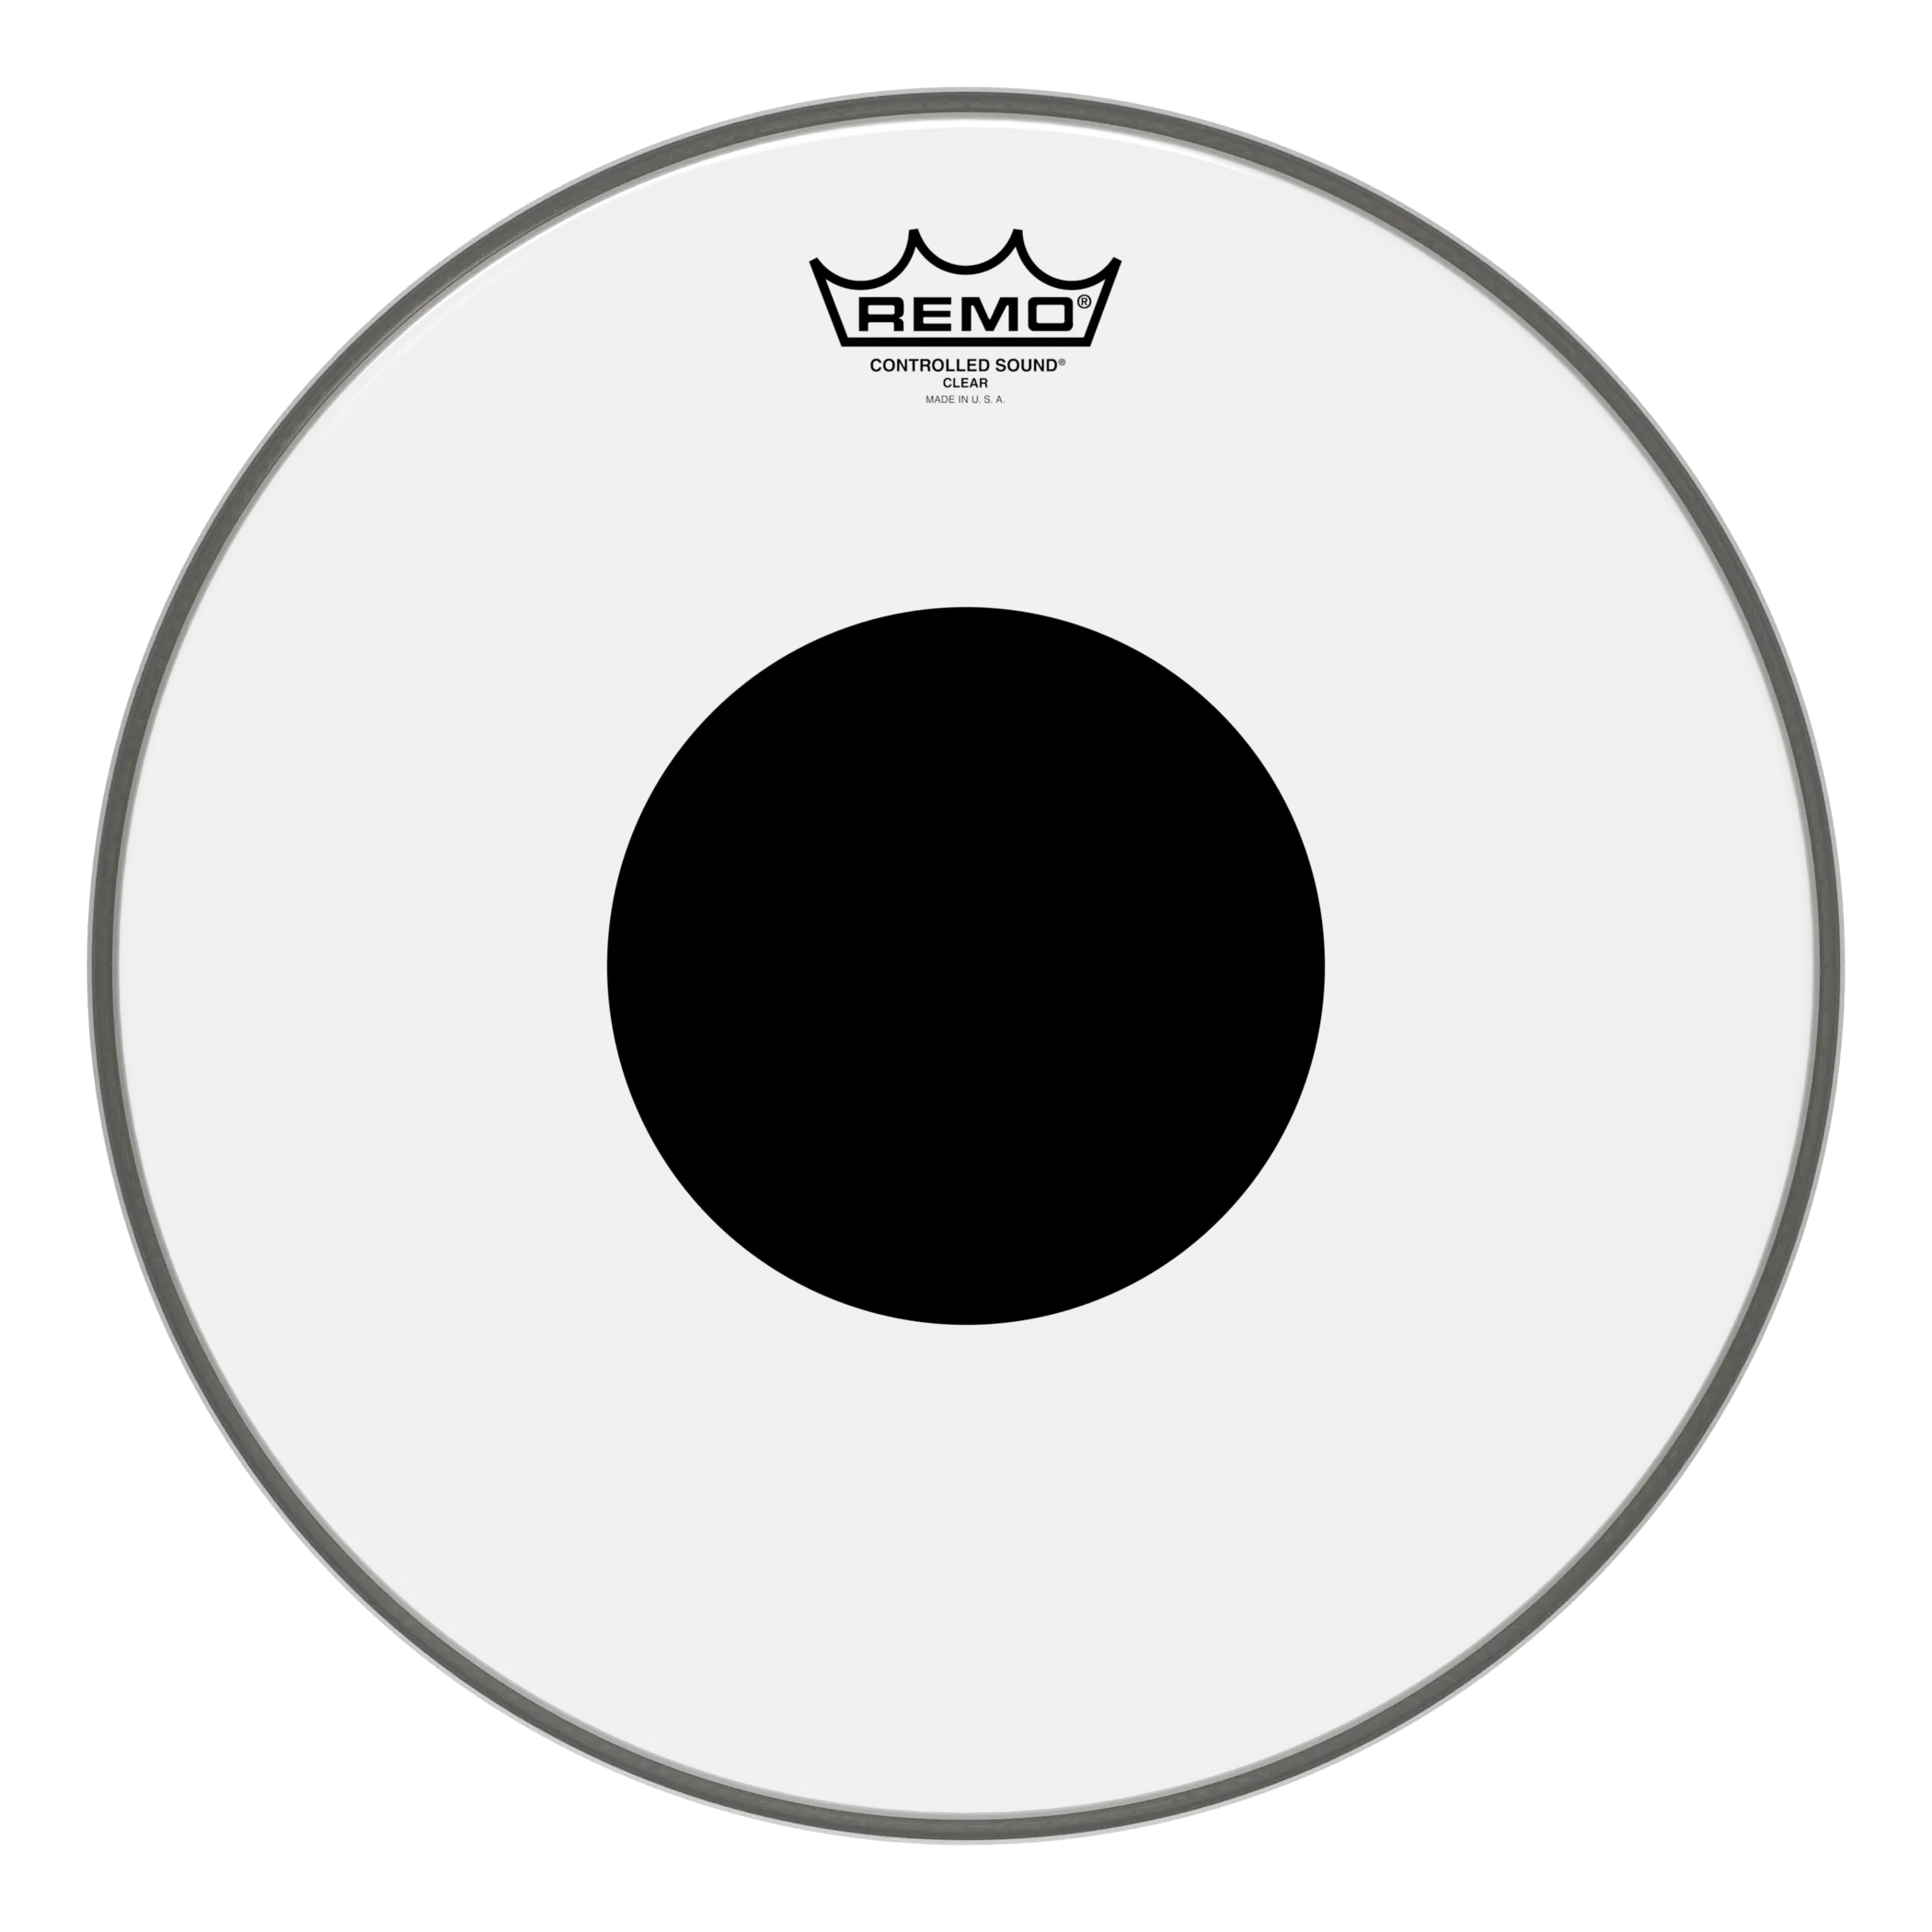 Remo 14" Controlled Sound Black Dot Clear Drumhead